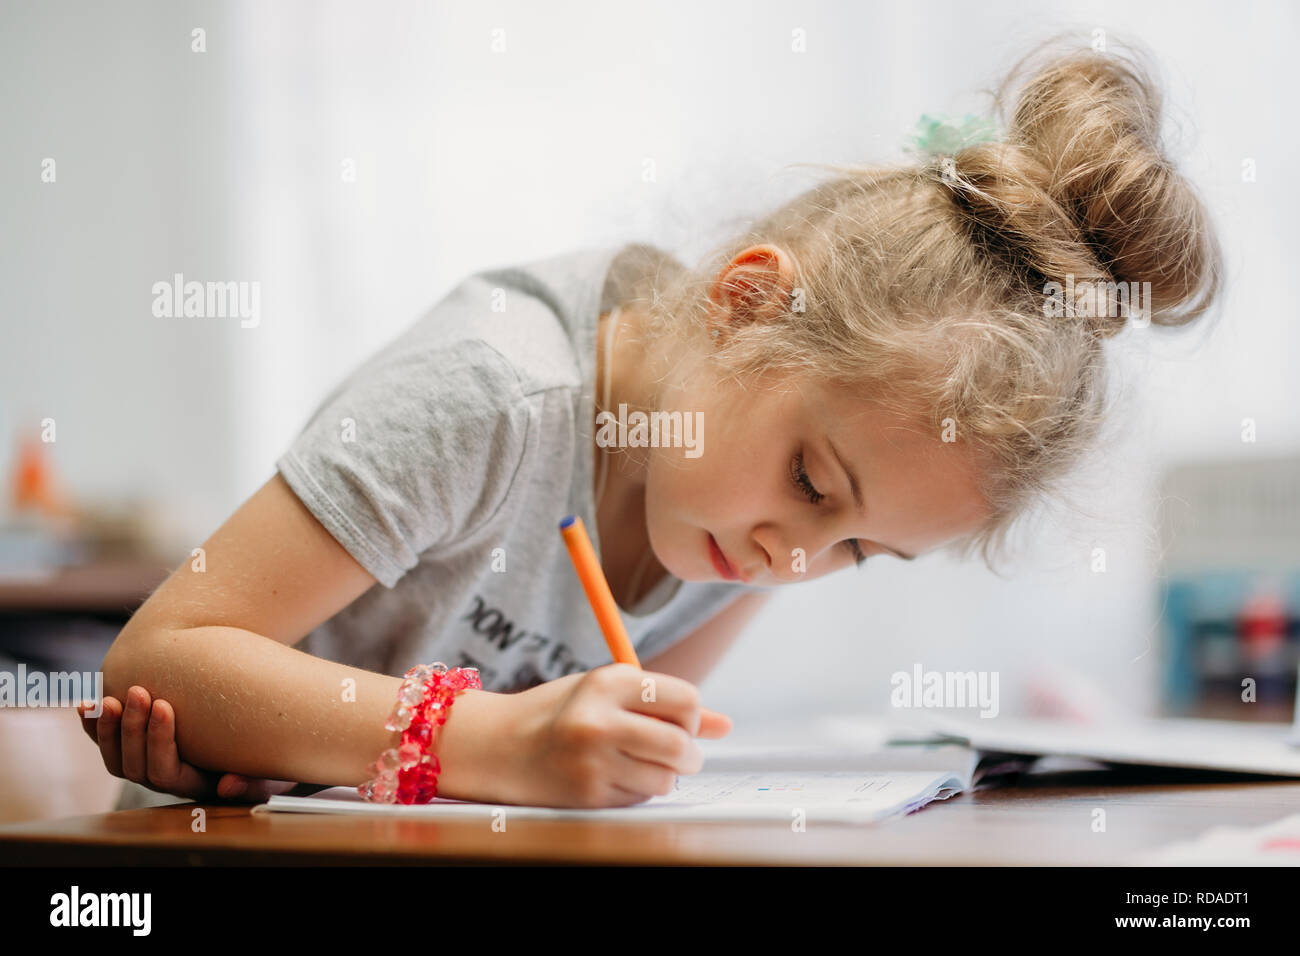 A seven-year-old girl sits at home at a table and writes in a notebook, completing a learning task or repeating lessons Stock Photo